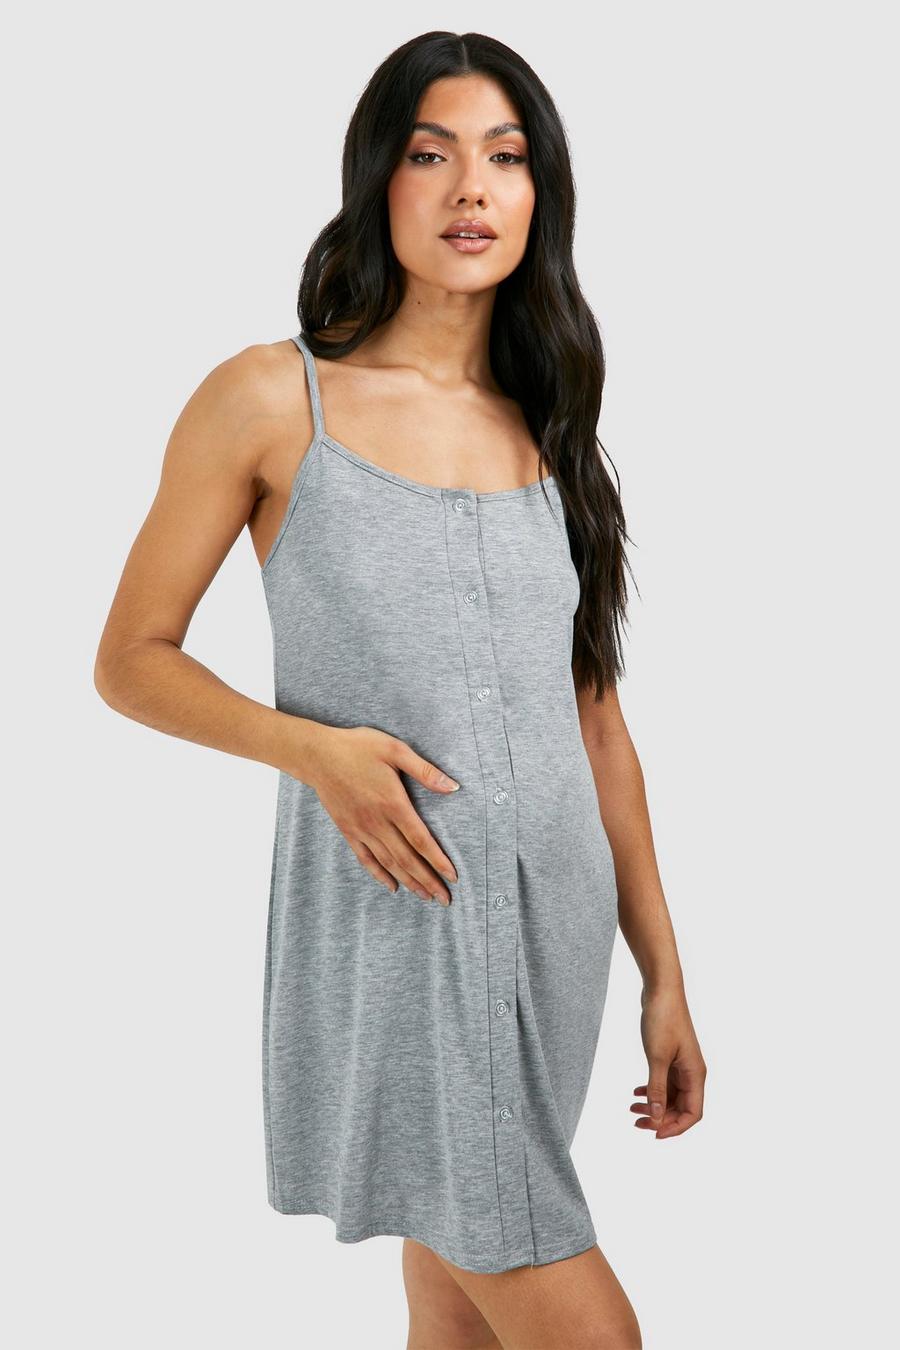 Boohoo Maternity Clothes Website - July 2020 Babies, Forums